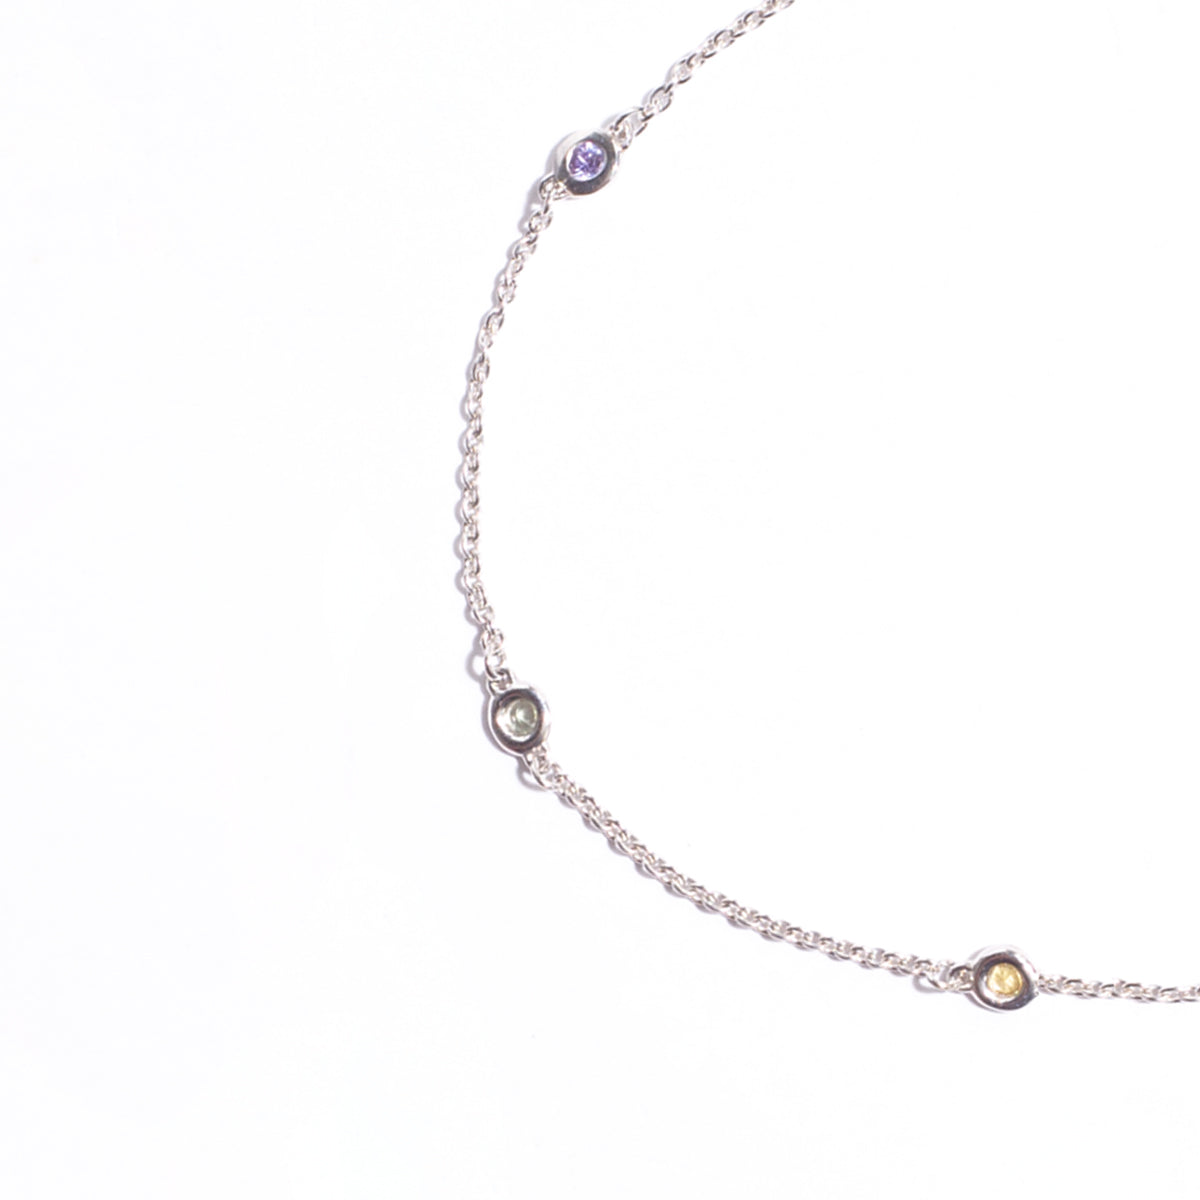 White gold and sapphire chain Bracelet